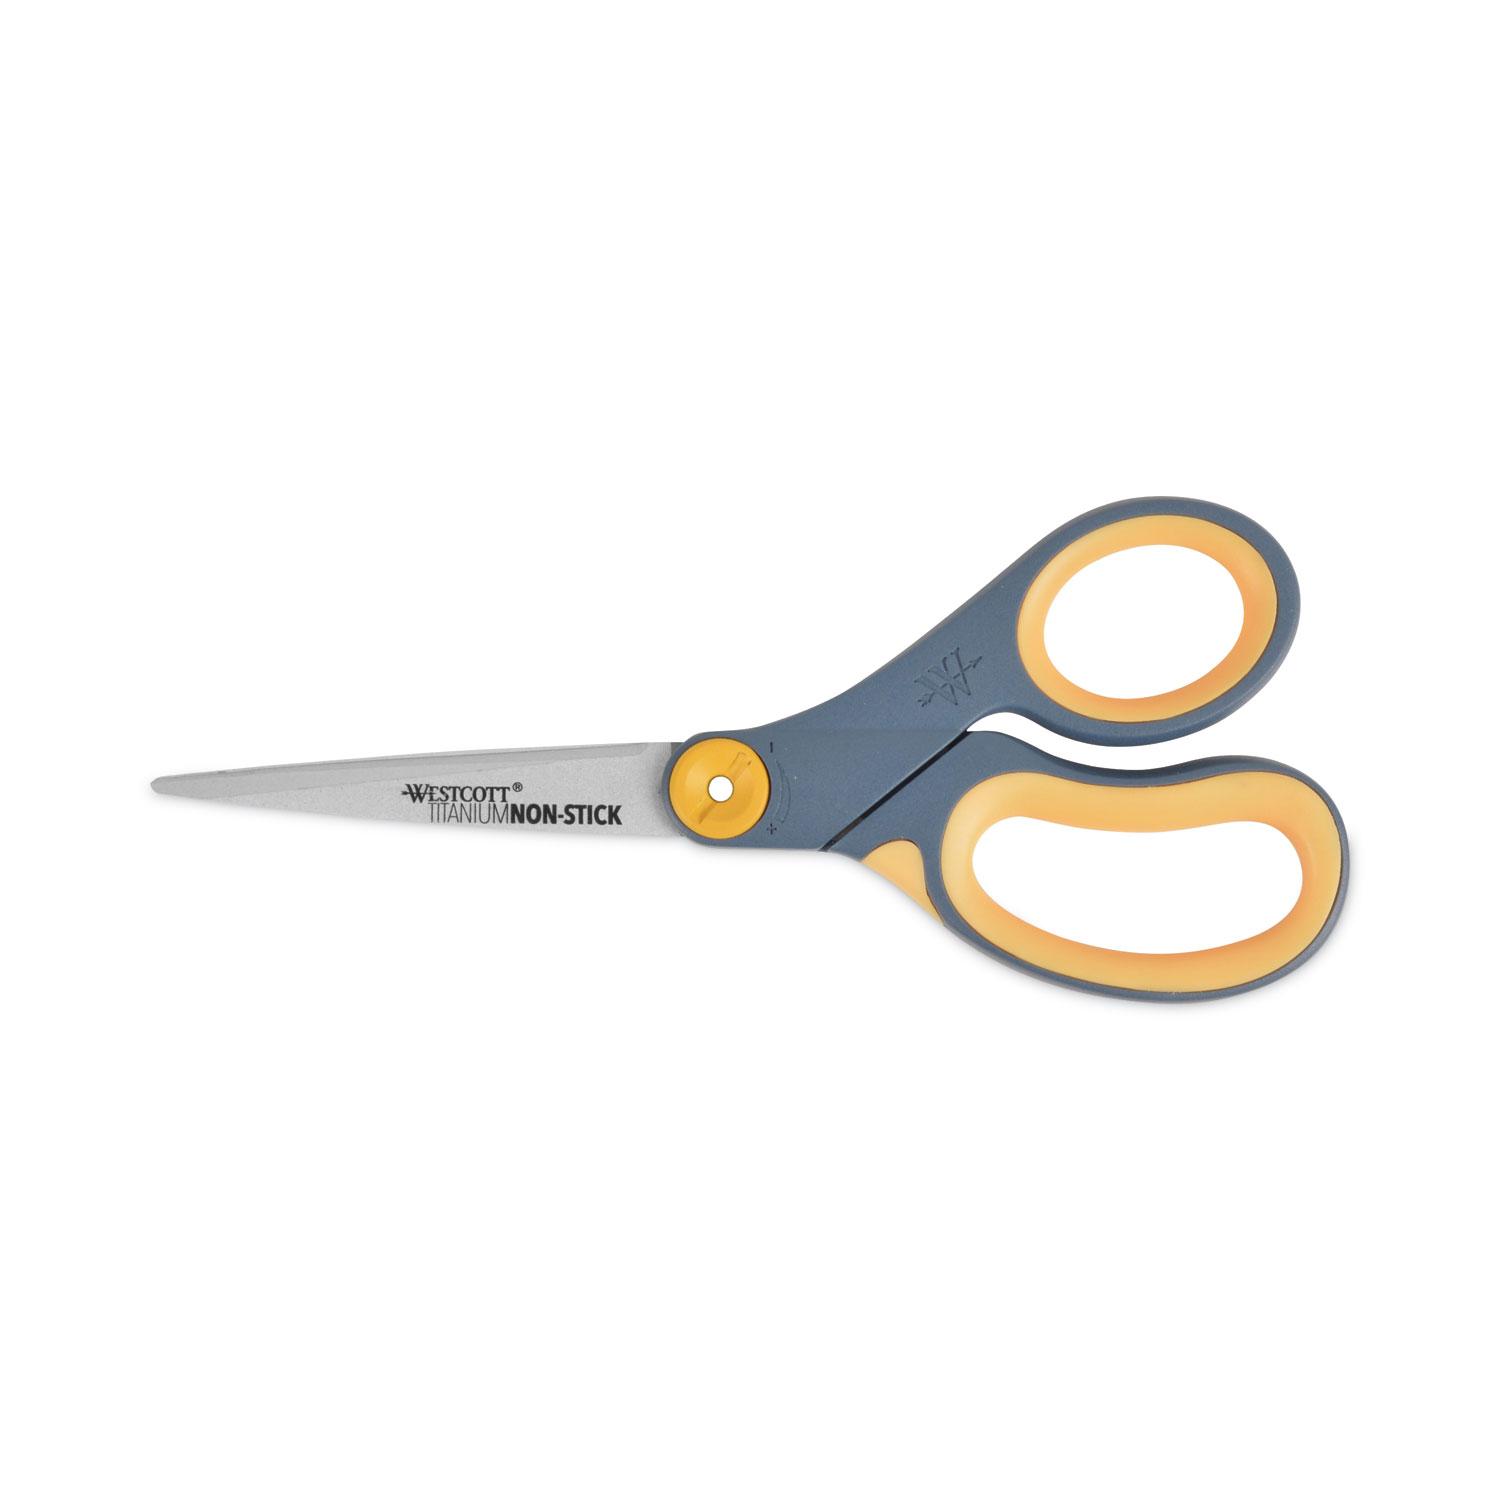 Non-Stick Titanium Bonded Scissors, 8 Long, 3.25 Cut Length, Gray/Yellow  Straight Handle - BOSS Office and Computer Products